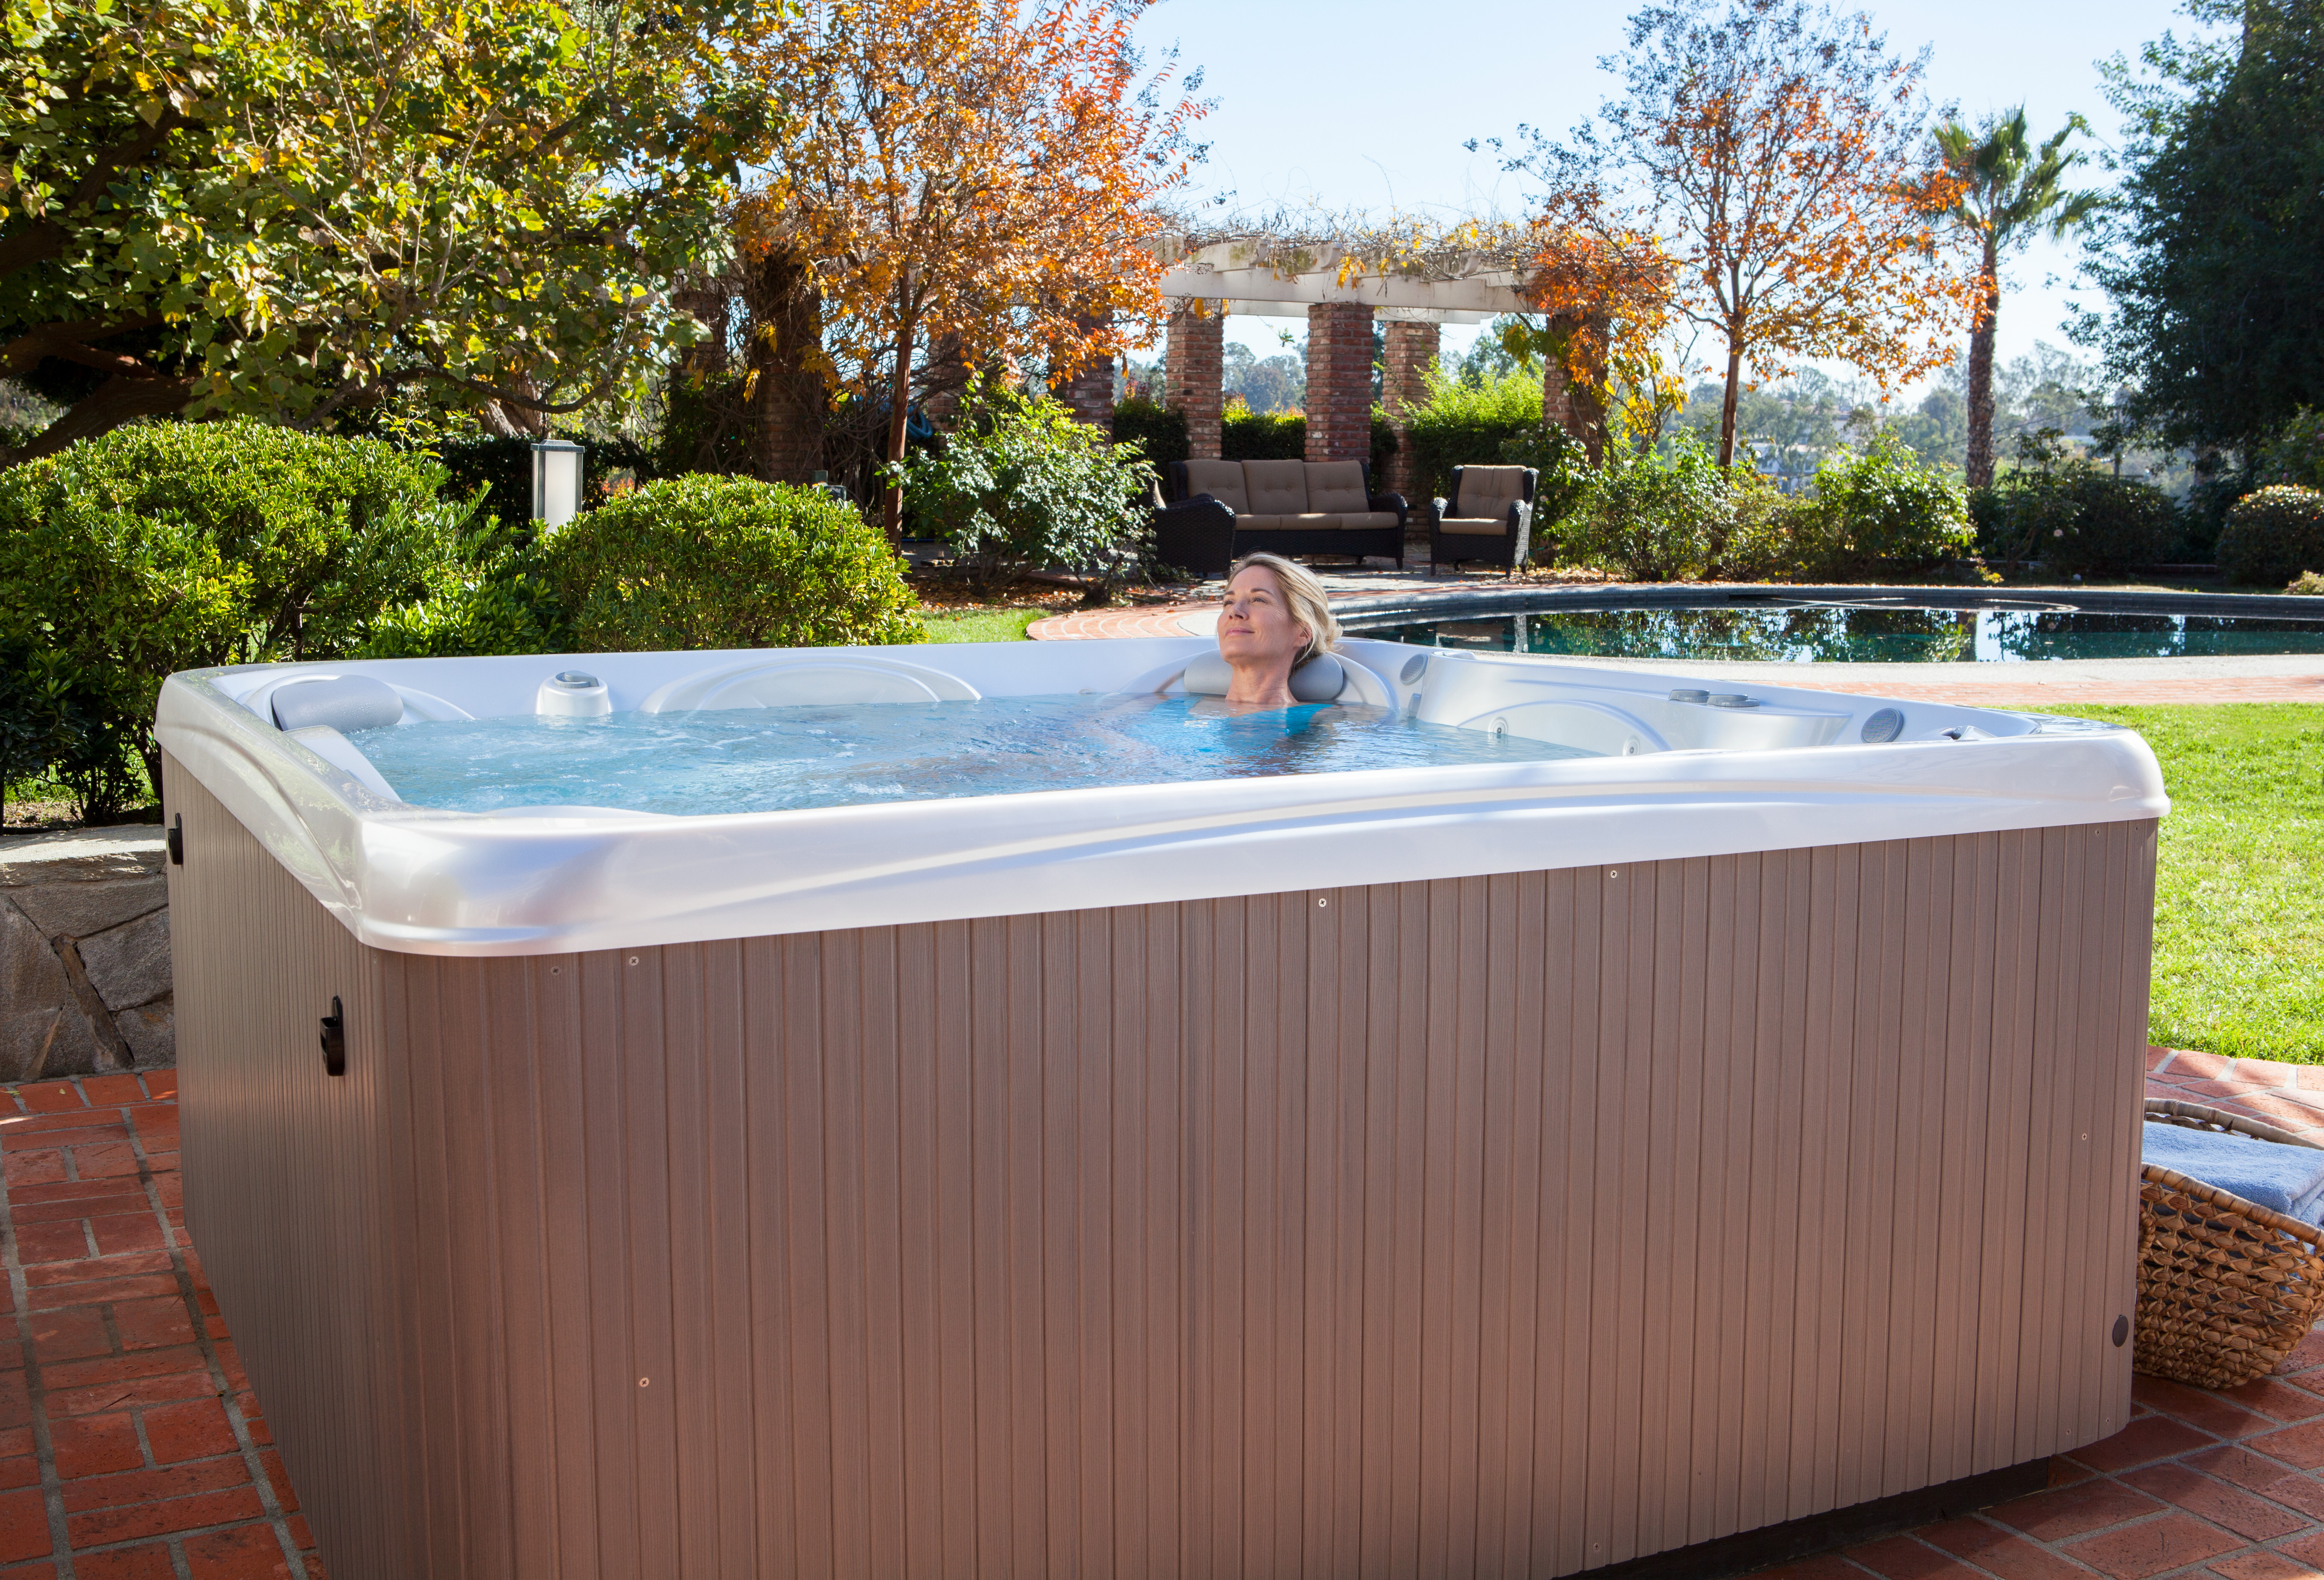 5 Tips For Autumn Hot Tubbing